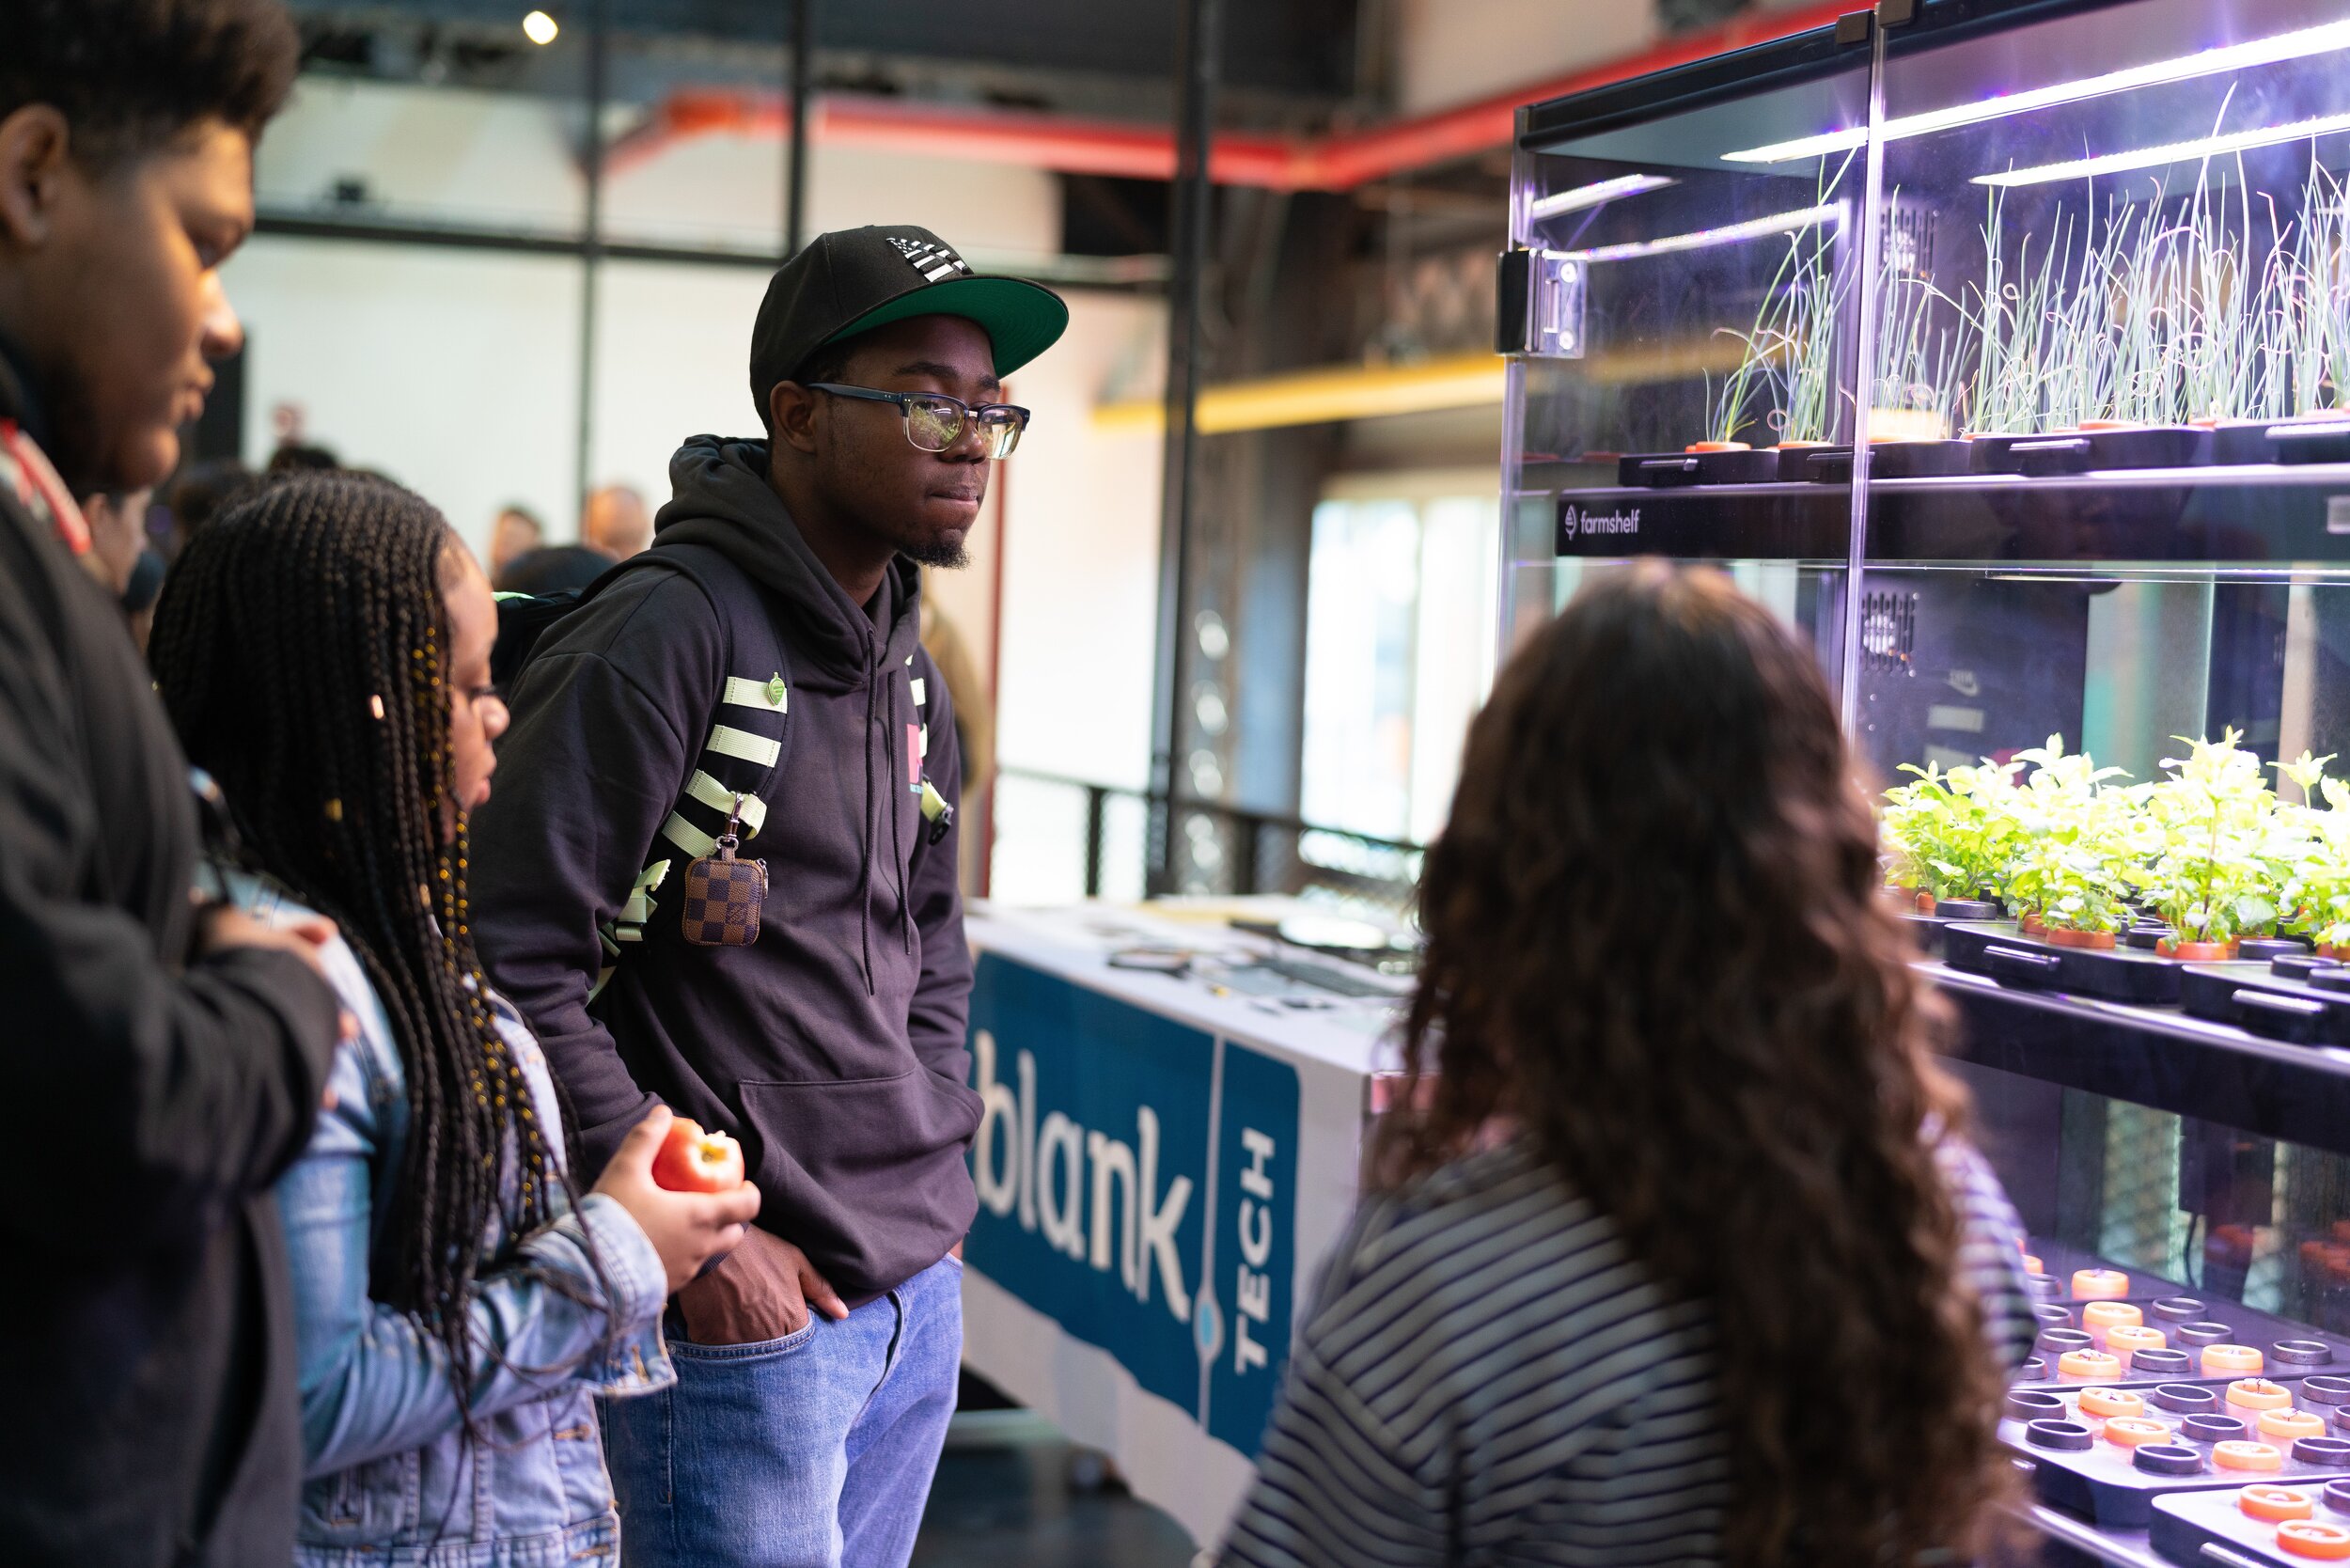   Students watch a hydroponics demonstration at New Lab's HE3AT launch event.&nbsp;  